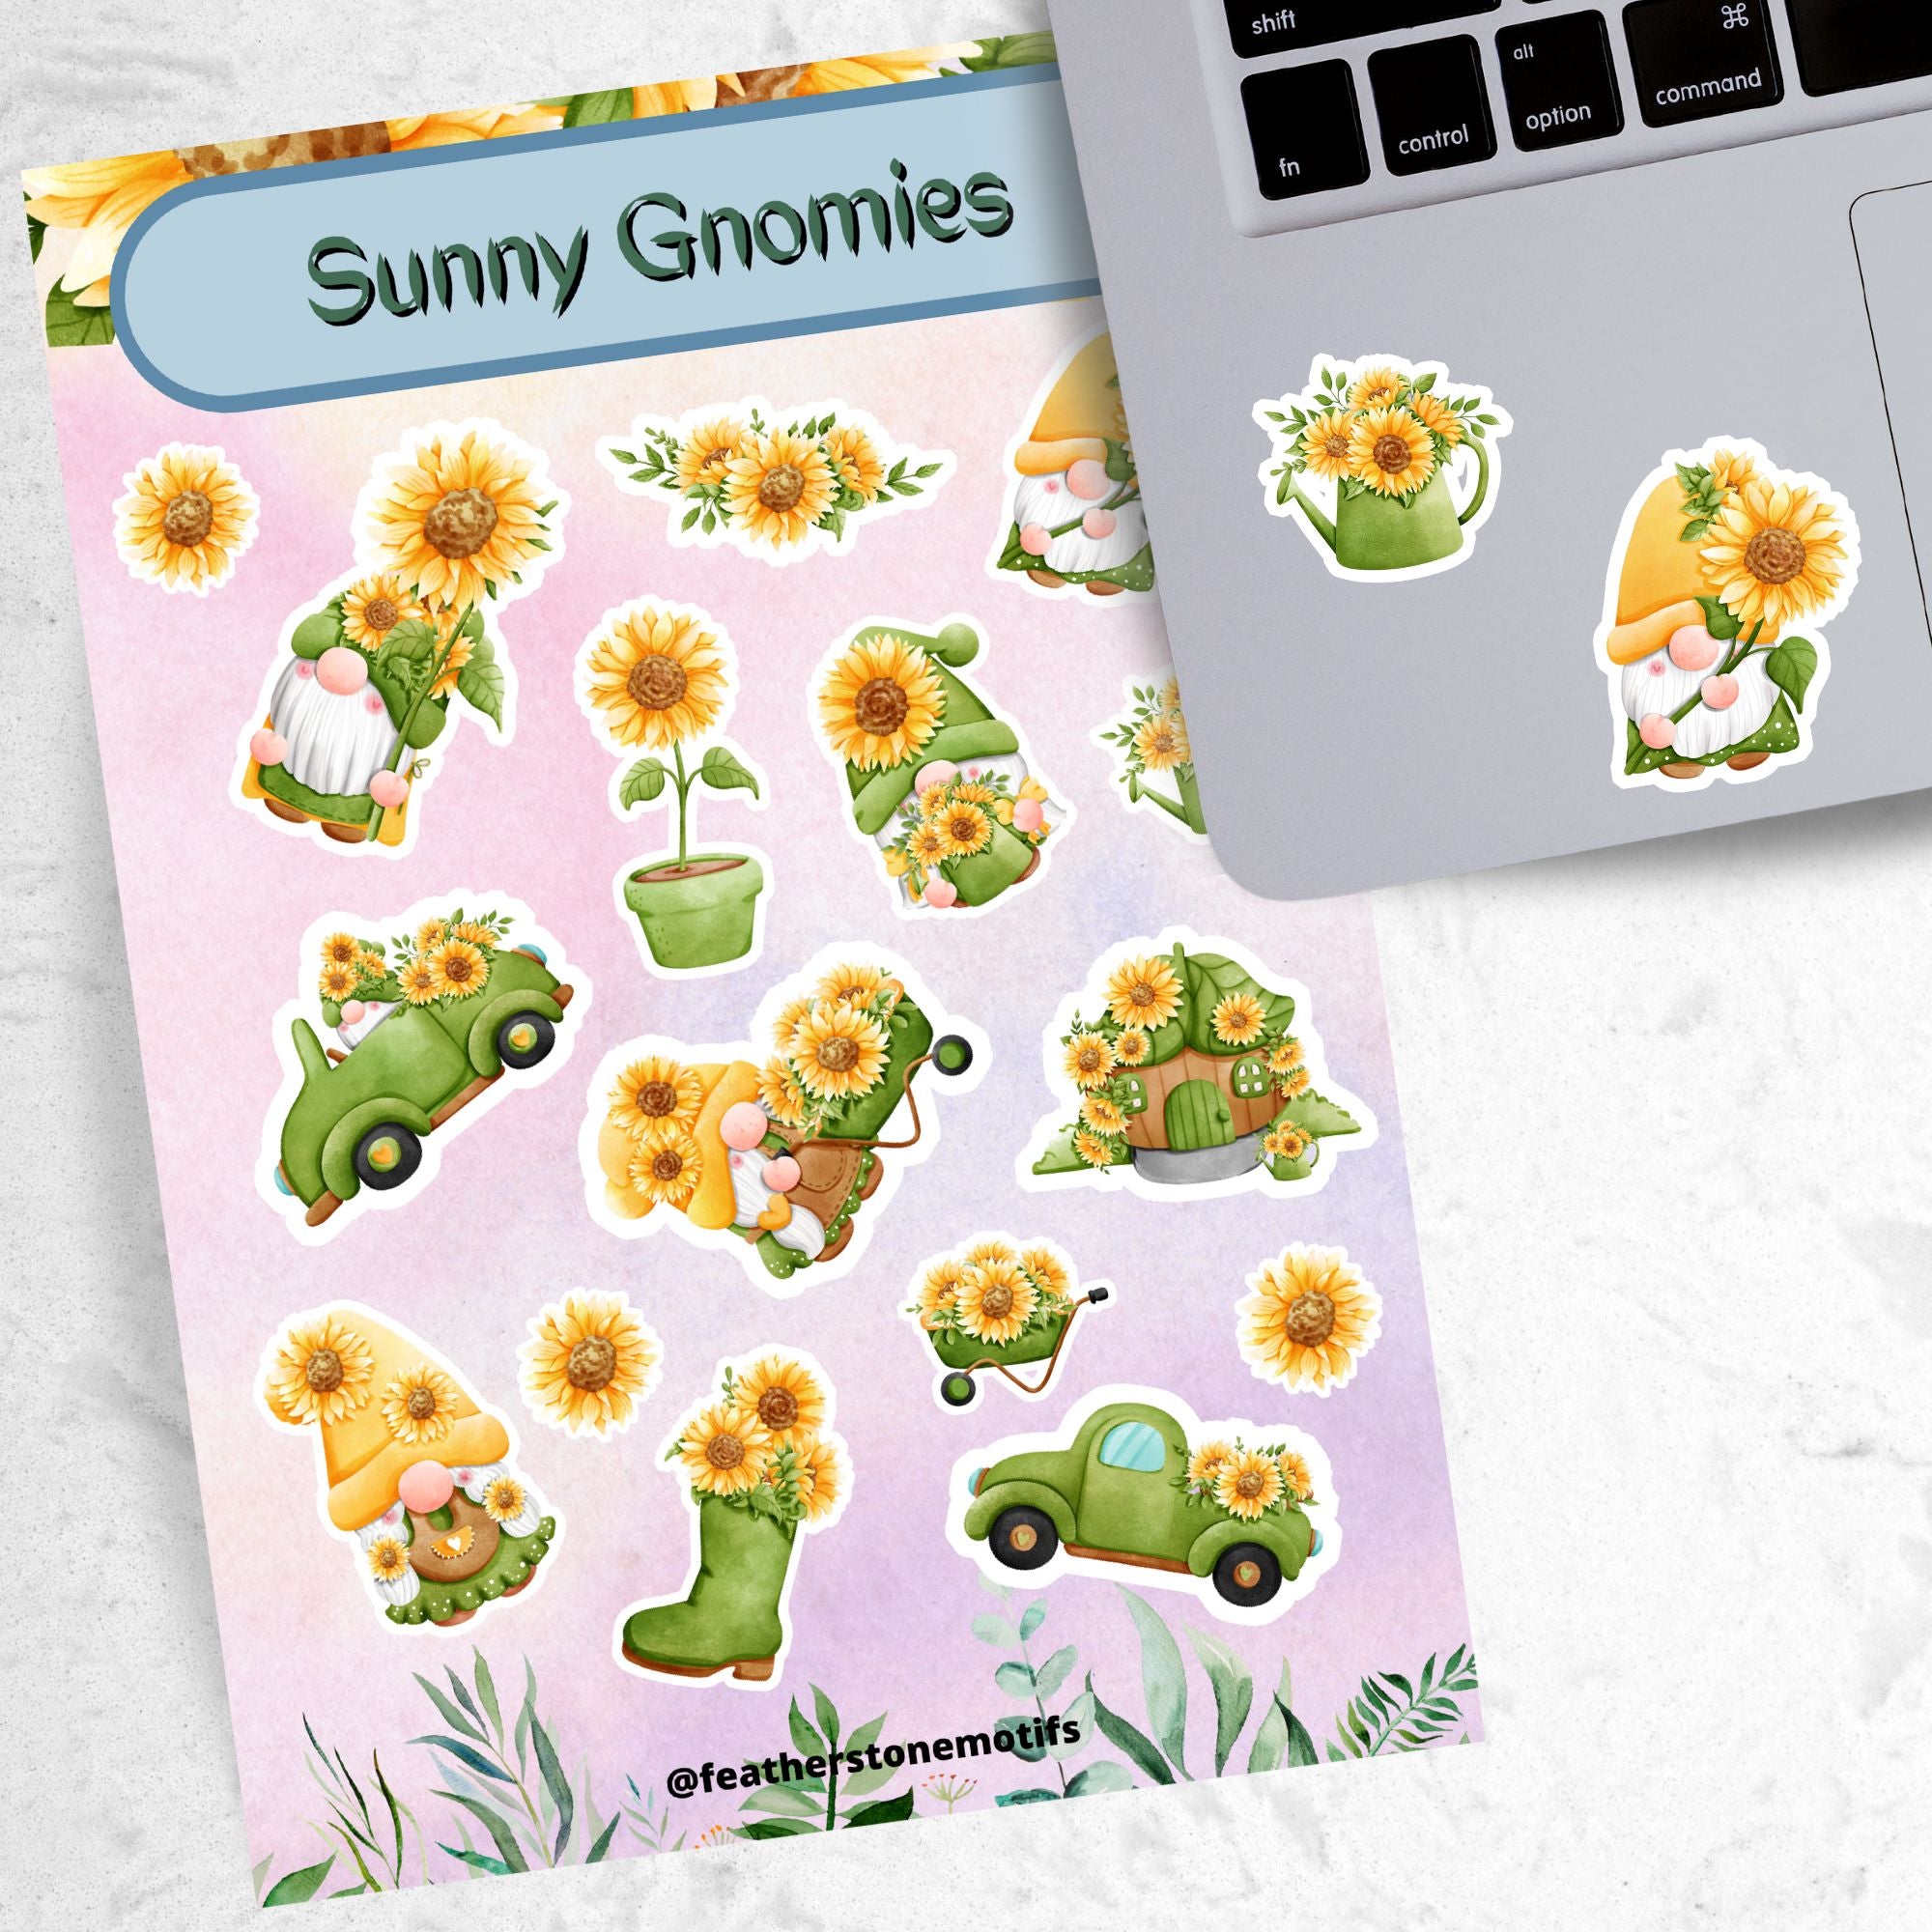 Sunflowers and Gnomes; what a perfect combination! This sticker is filled with stickers of sunflowers and gnomes with sunflowers.  This image shows the sticker sheet next to an open laptop with a watering can filled with sunflowers sticker and a gnome holding a large sunflower sticker applied below the keyboard.